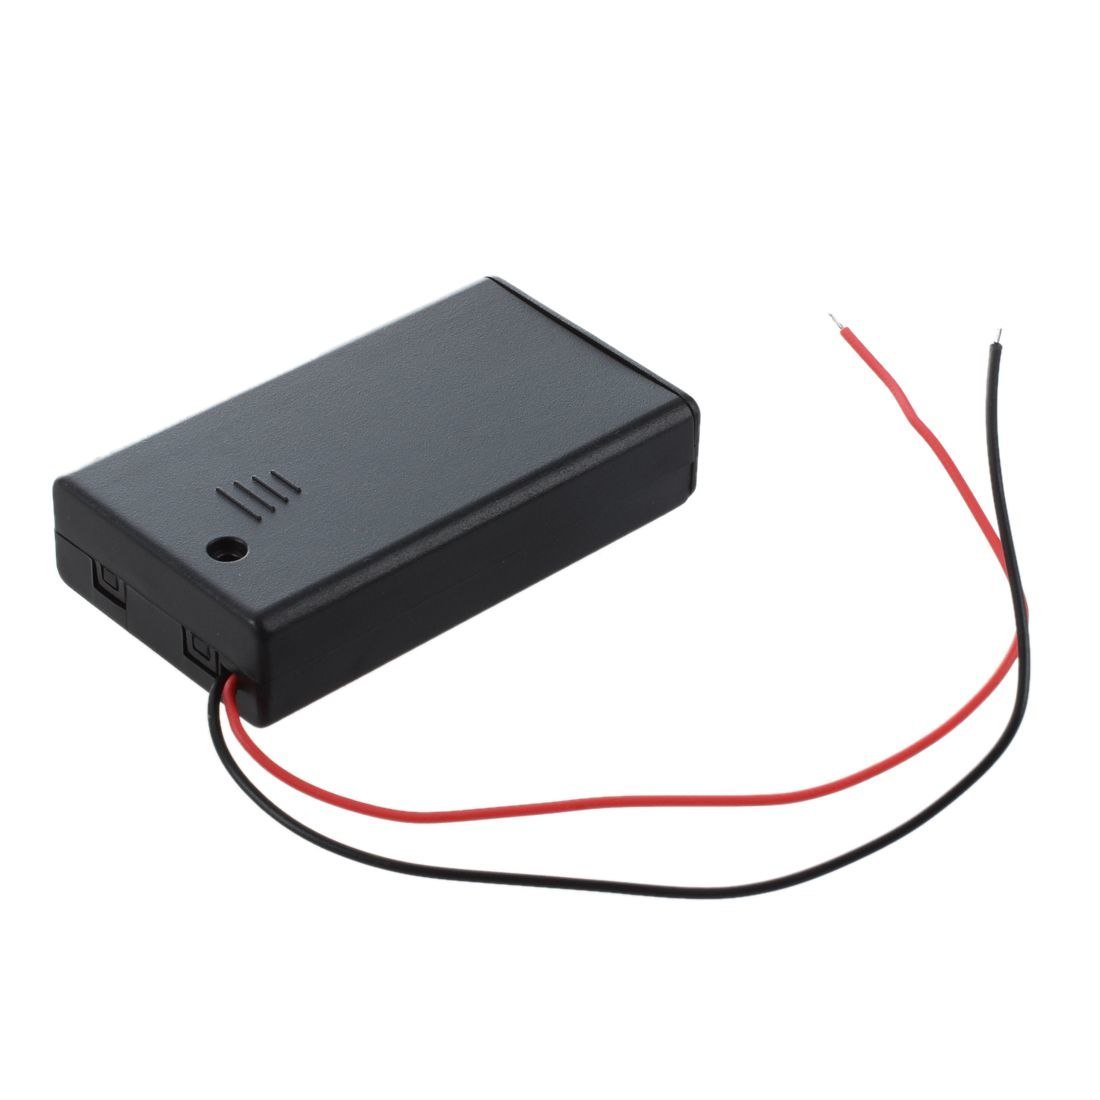 3 X 1.5V Aaa Battery Holder With Cover And Onoff Switch